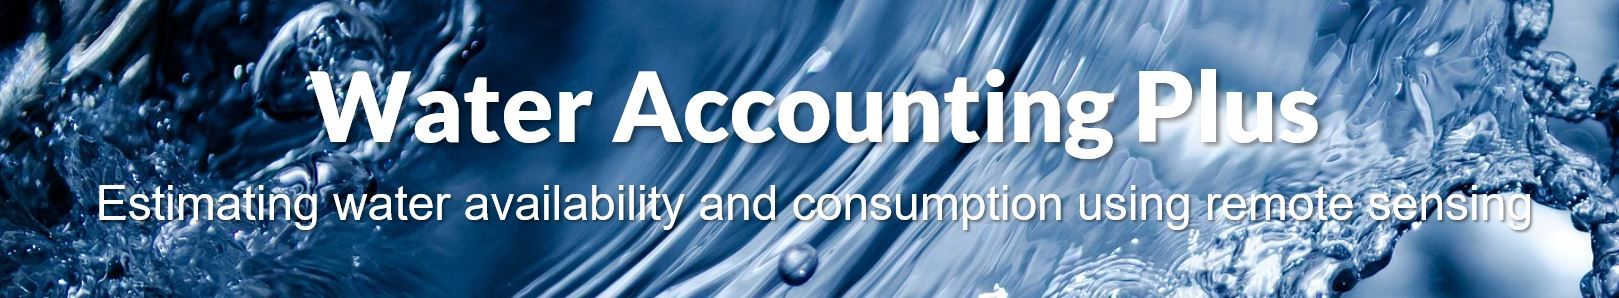 Water Accounting Plus